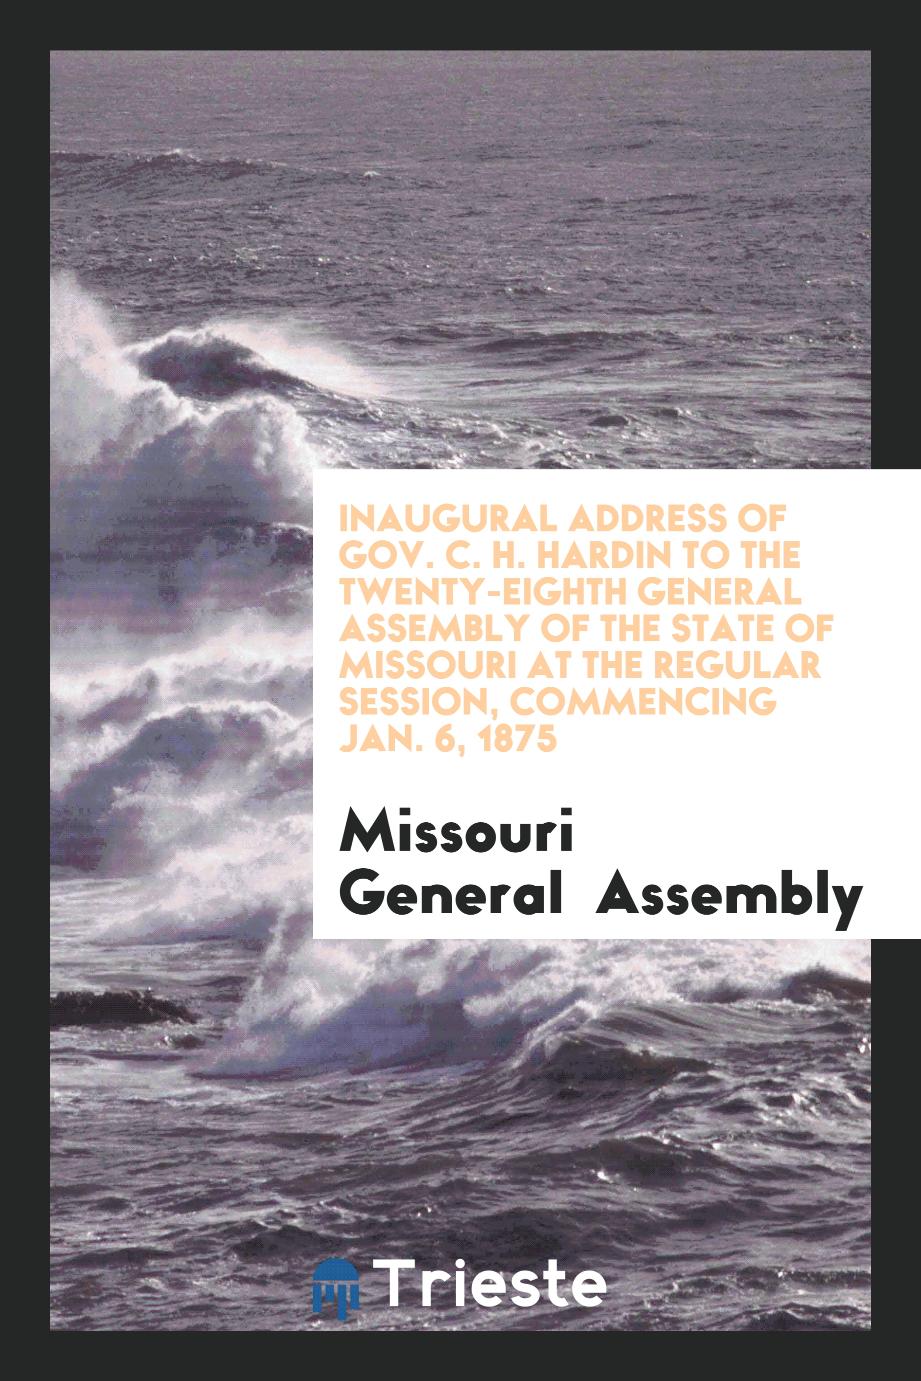 Inaugural Address of Gov. C. H. Hardin to the Twenty-Eighth General Assembly of the State of Missouri at the Regular Session, Commencing Jan. 6, 1875